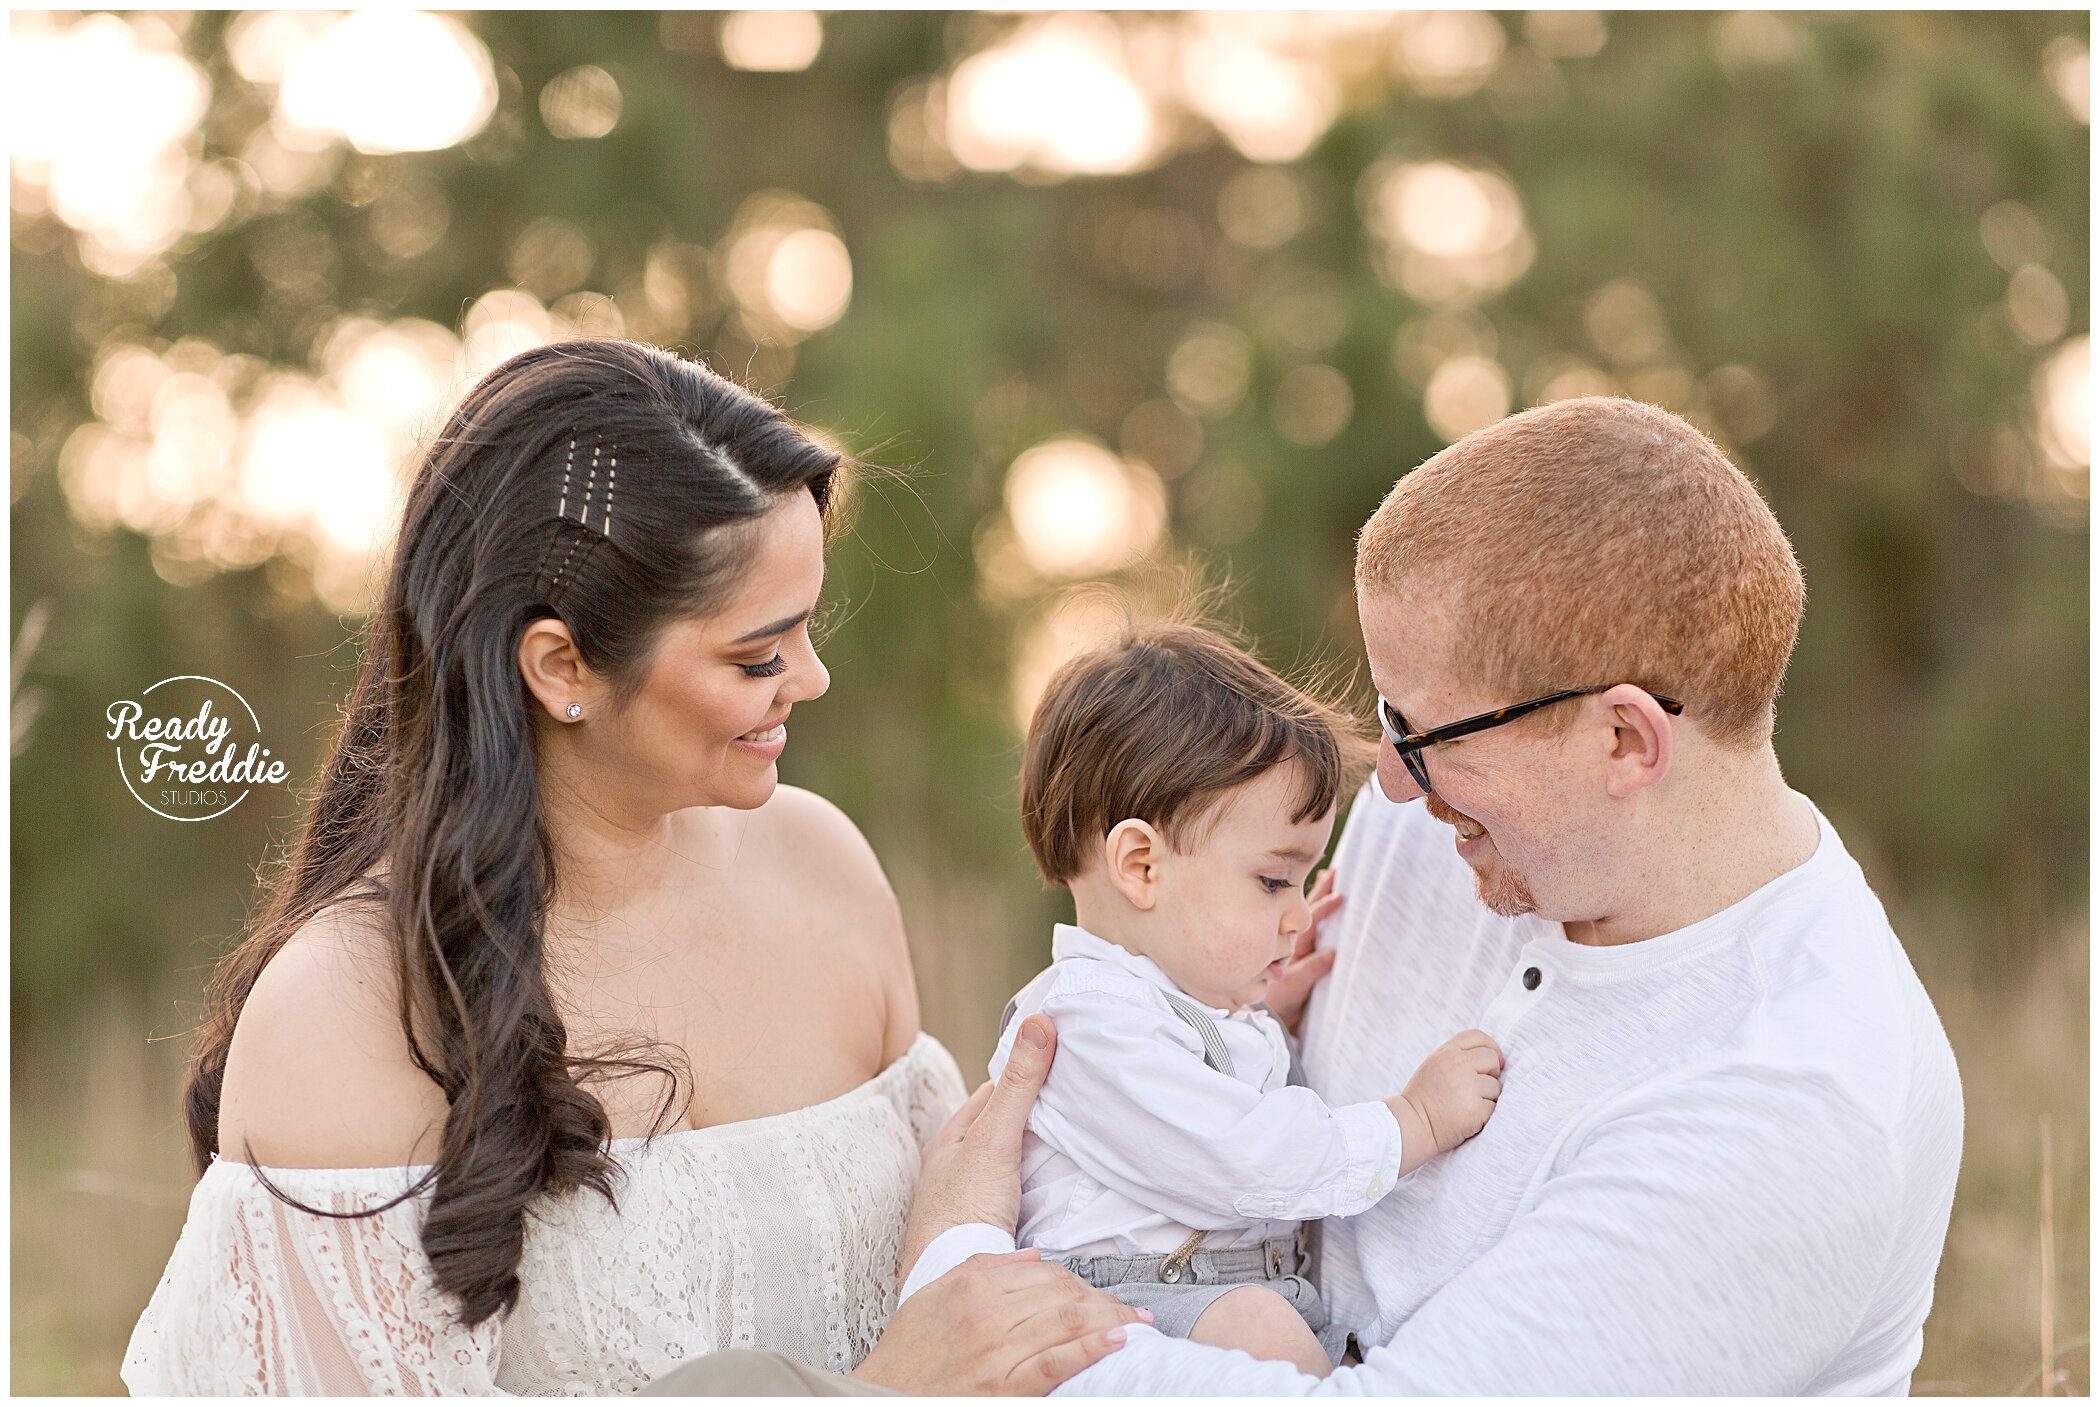 Family photos with baby | Sunset field Session | Ready Freddie Studios | Miami, FL